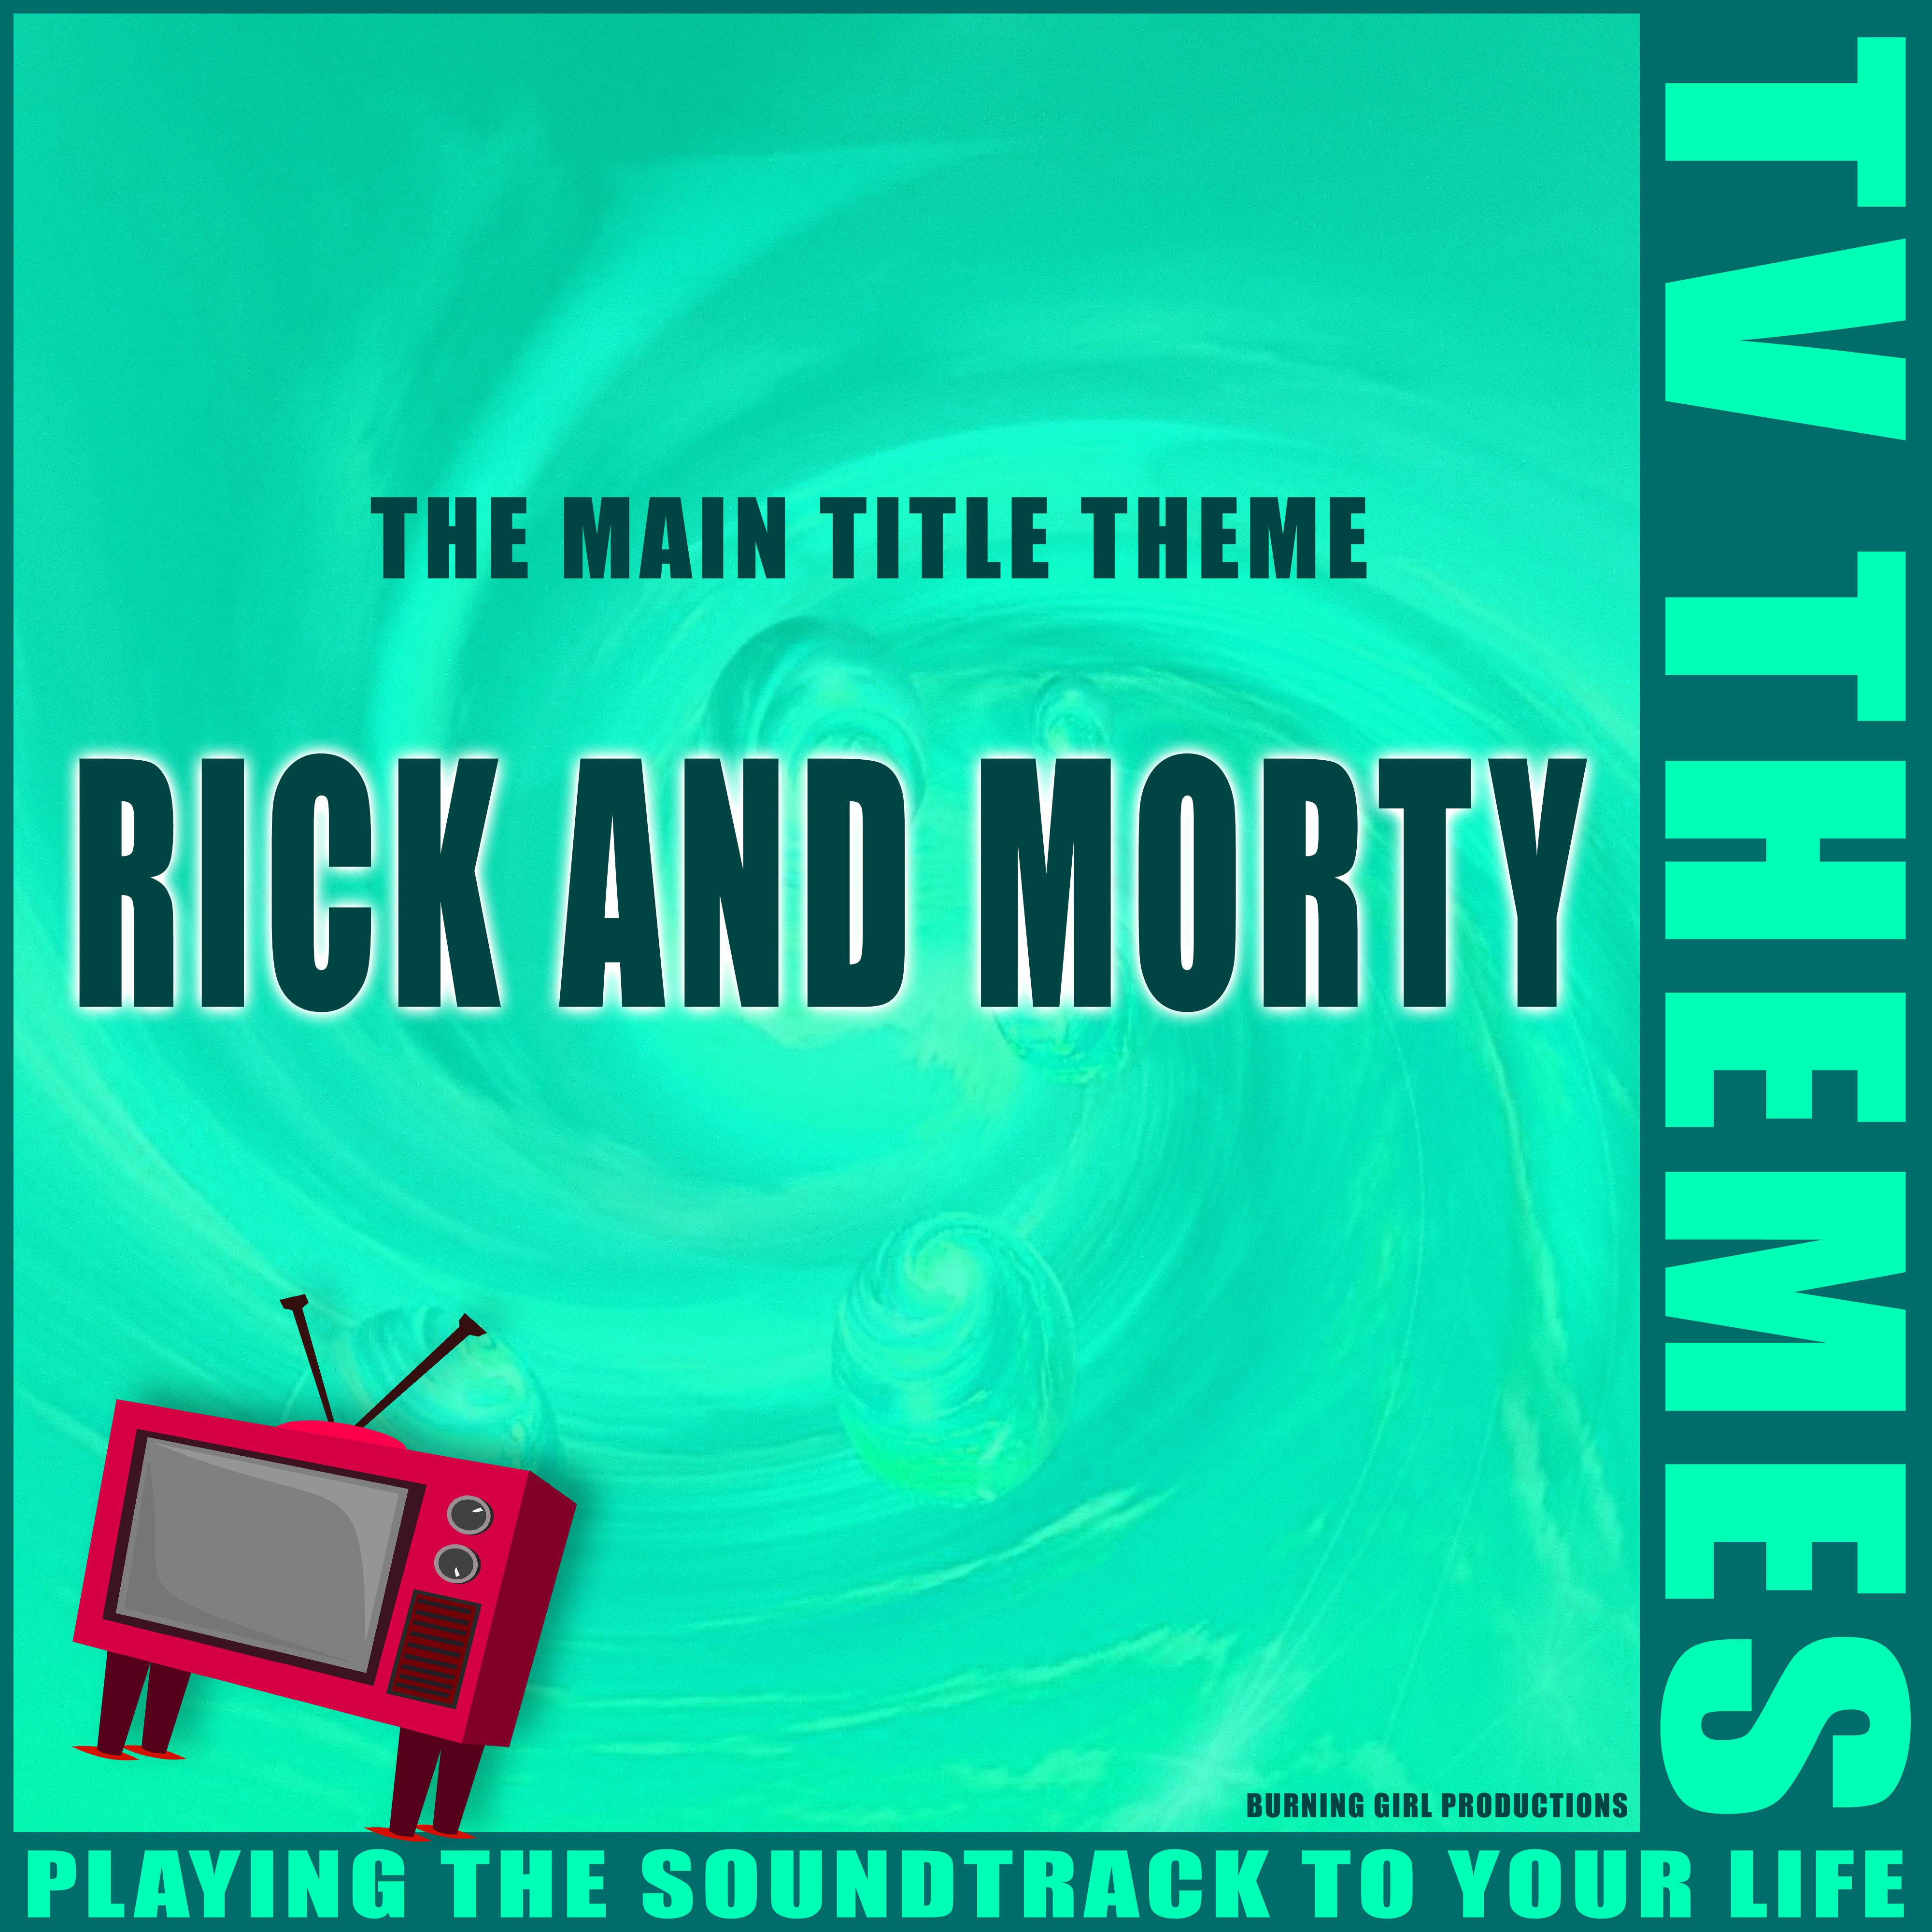 Rick And Morty - The Main Title Theme